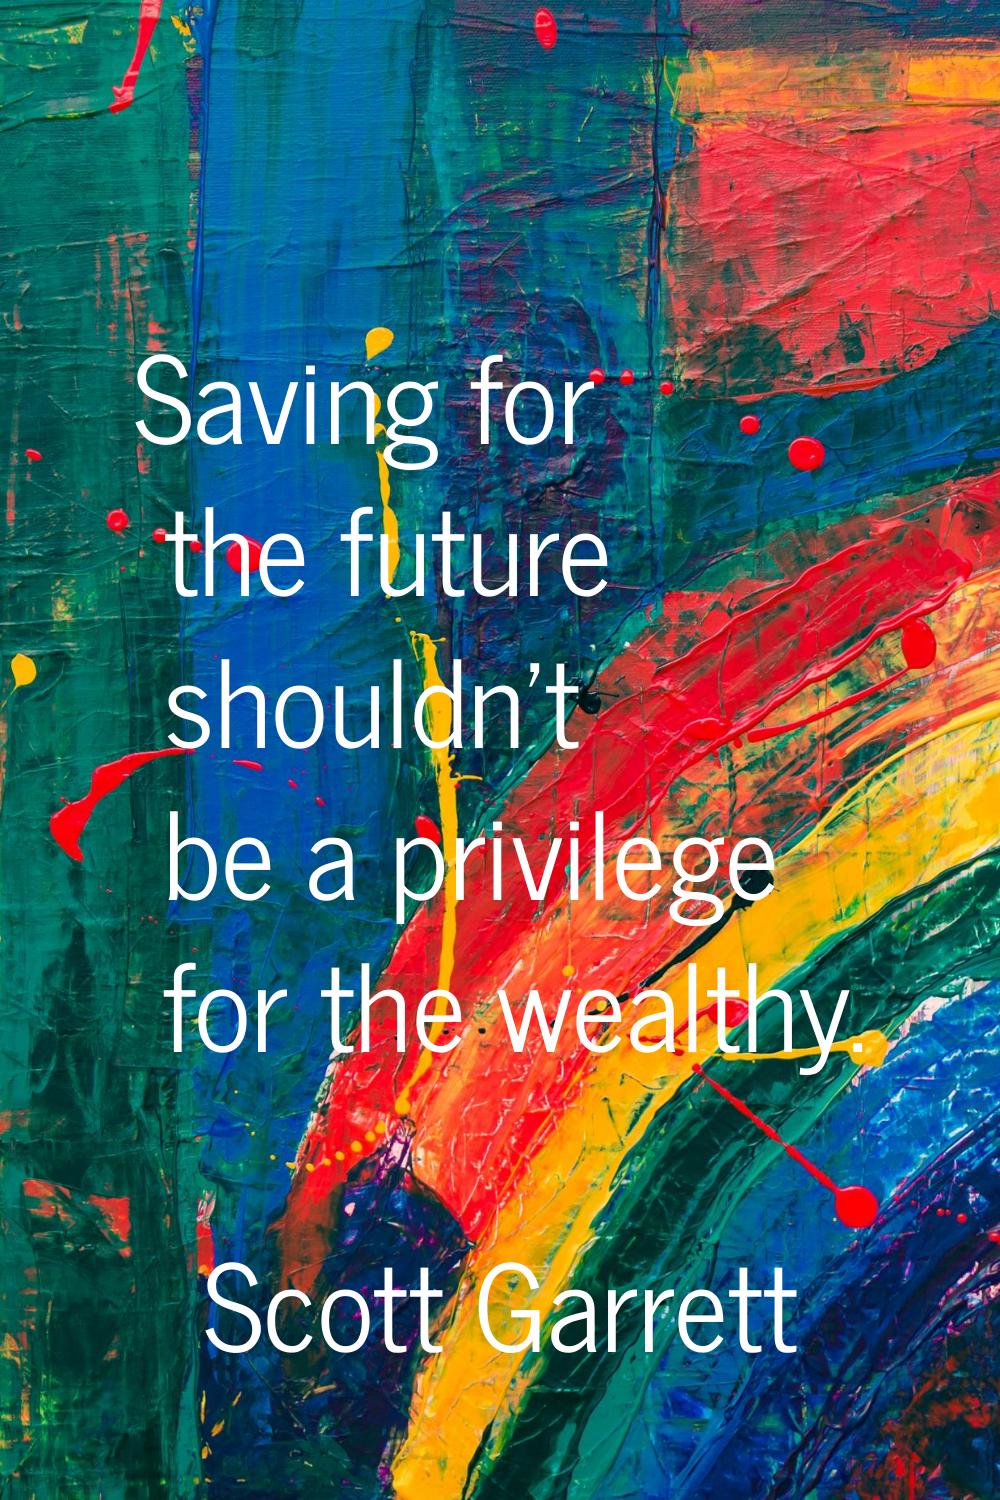 Saving for the future shouldn't be a privilege for the wealthy.